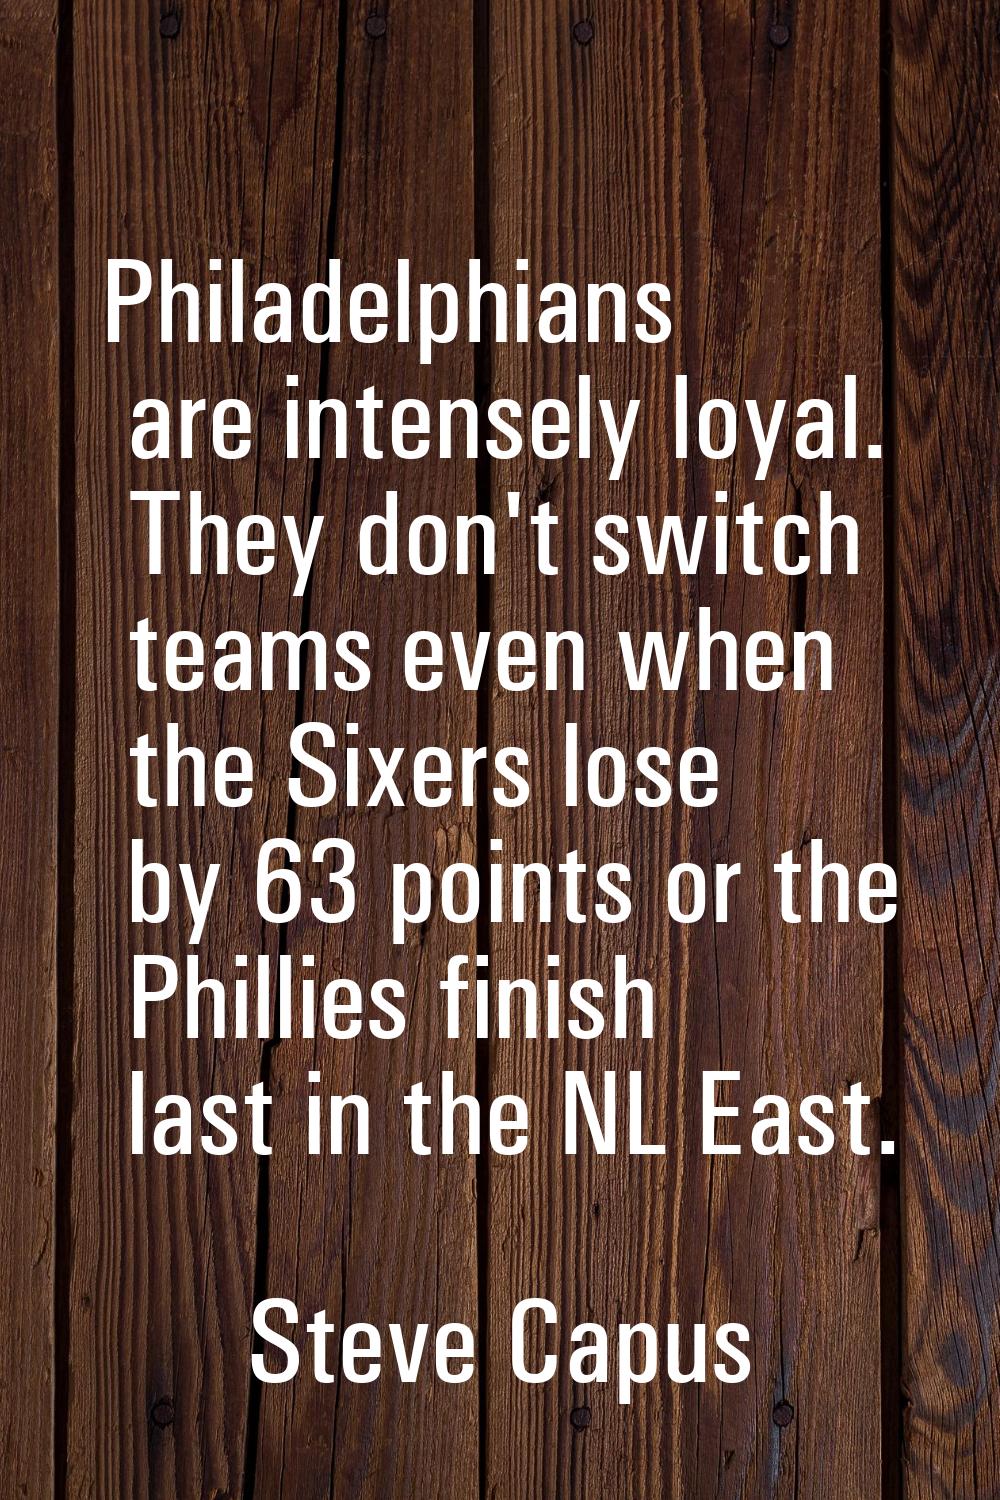 Philadelphians are intensely loyal. They don't switch teams even when the Sixers lose by 63 points 